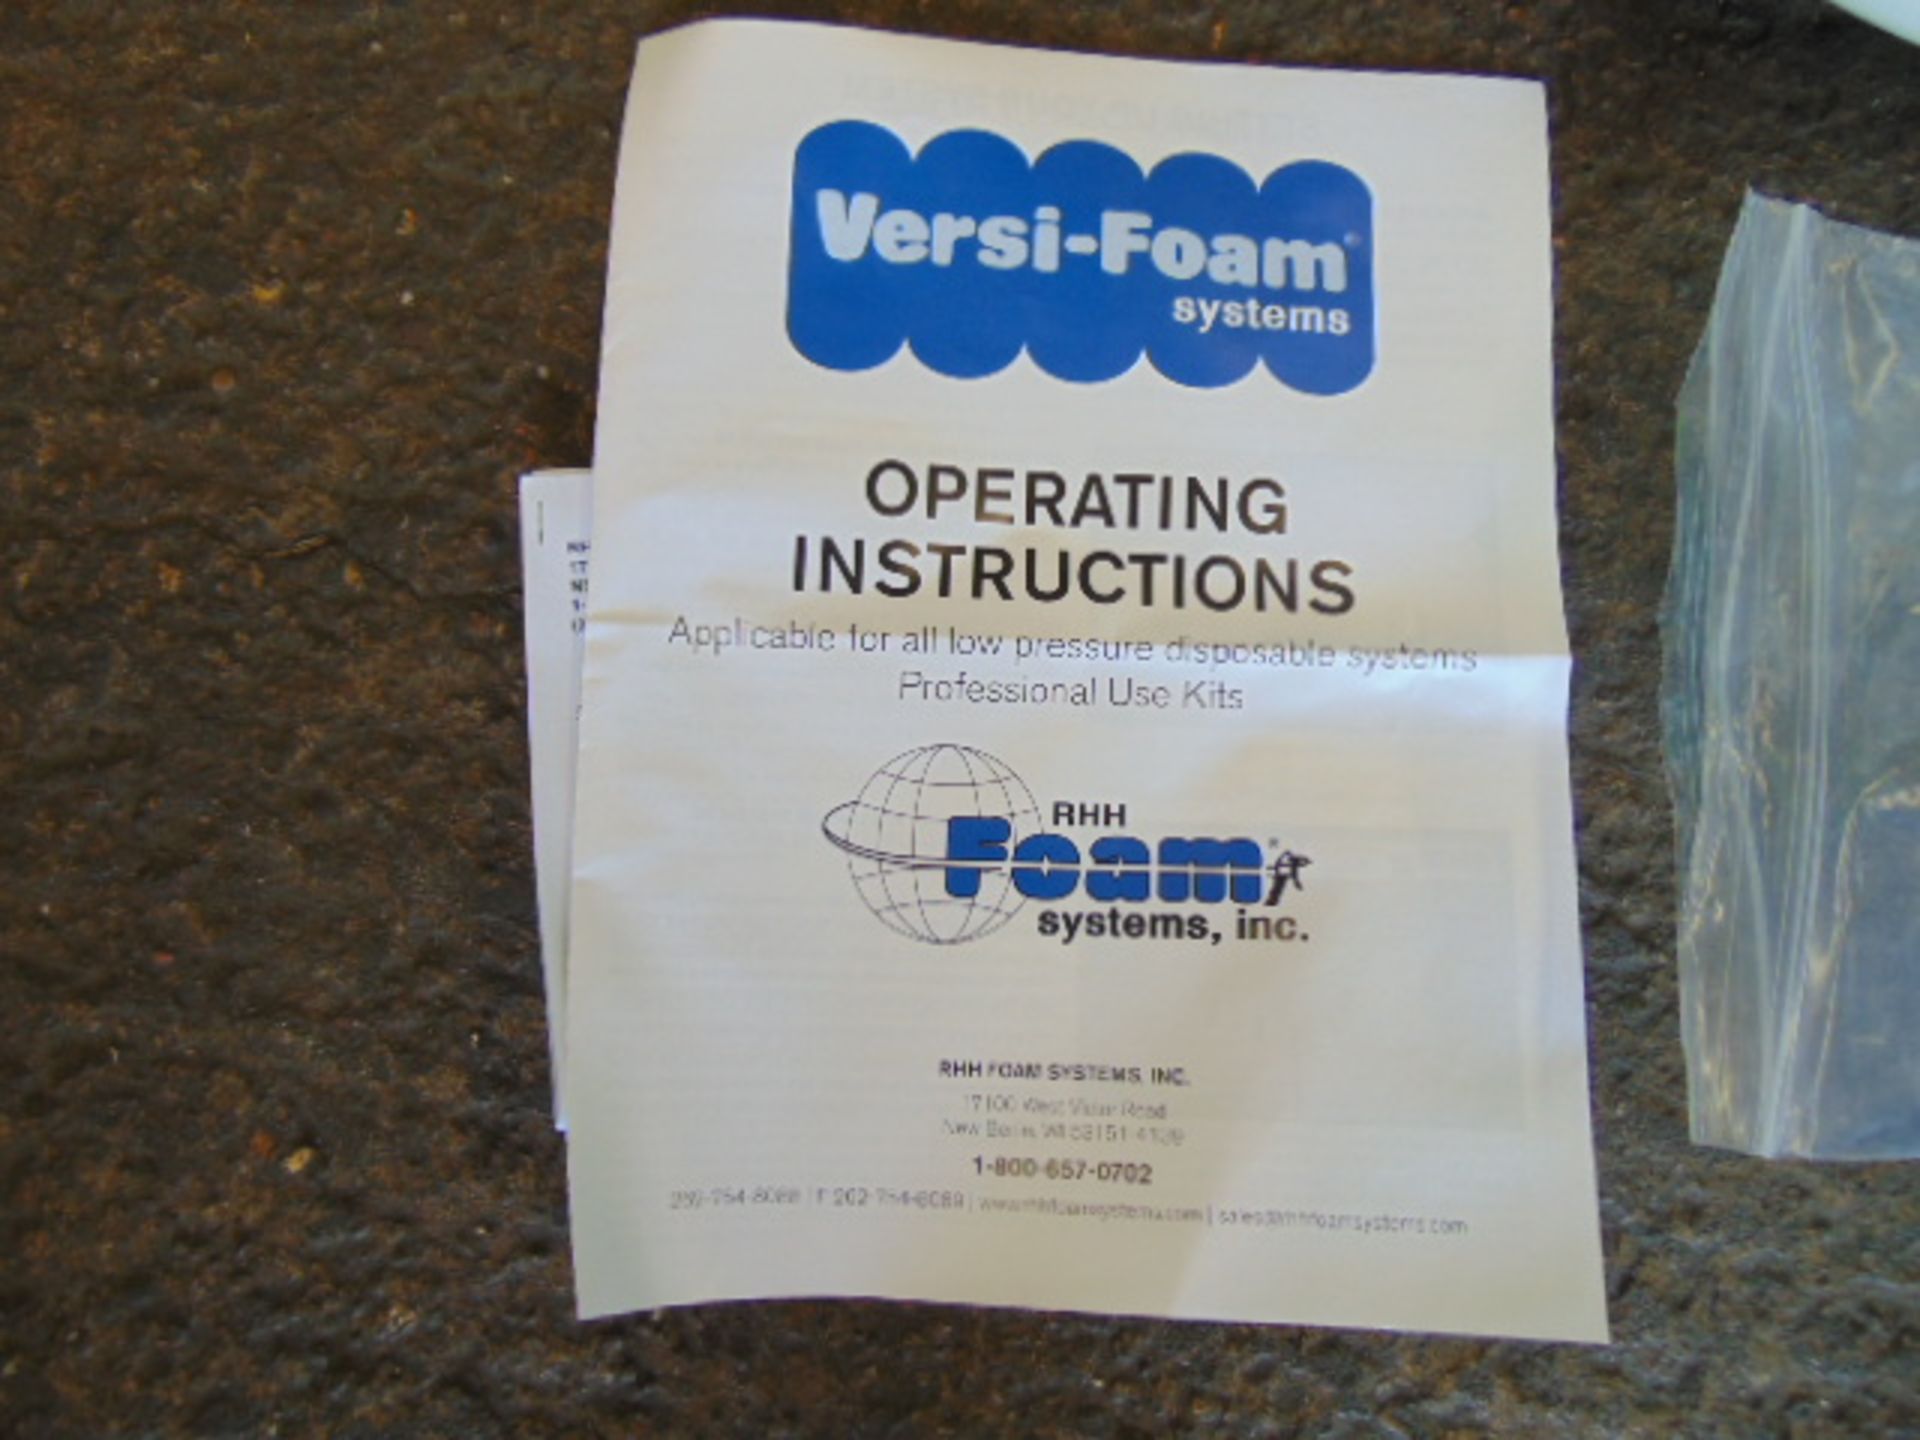 4 Packs (A & B Component) of Versi Foam System 50 Insulating Foam for Walls, Roof, Building etc - Image 6 of 11